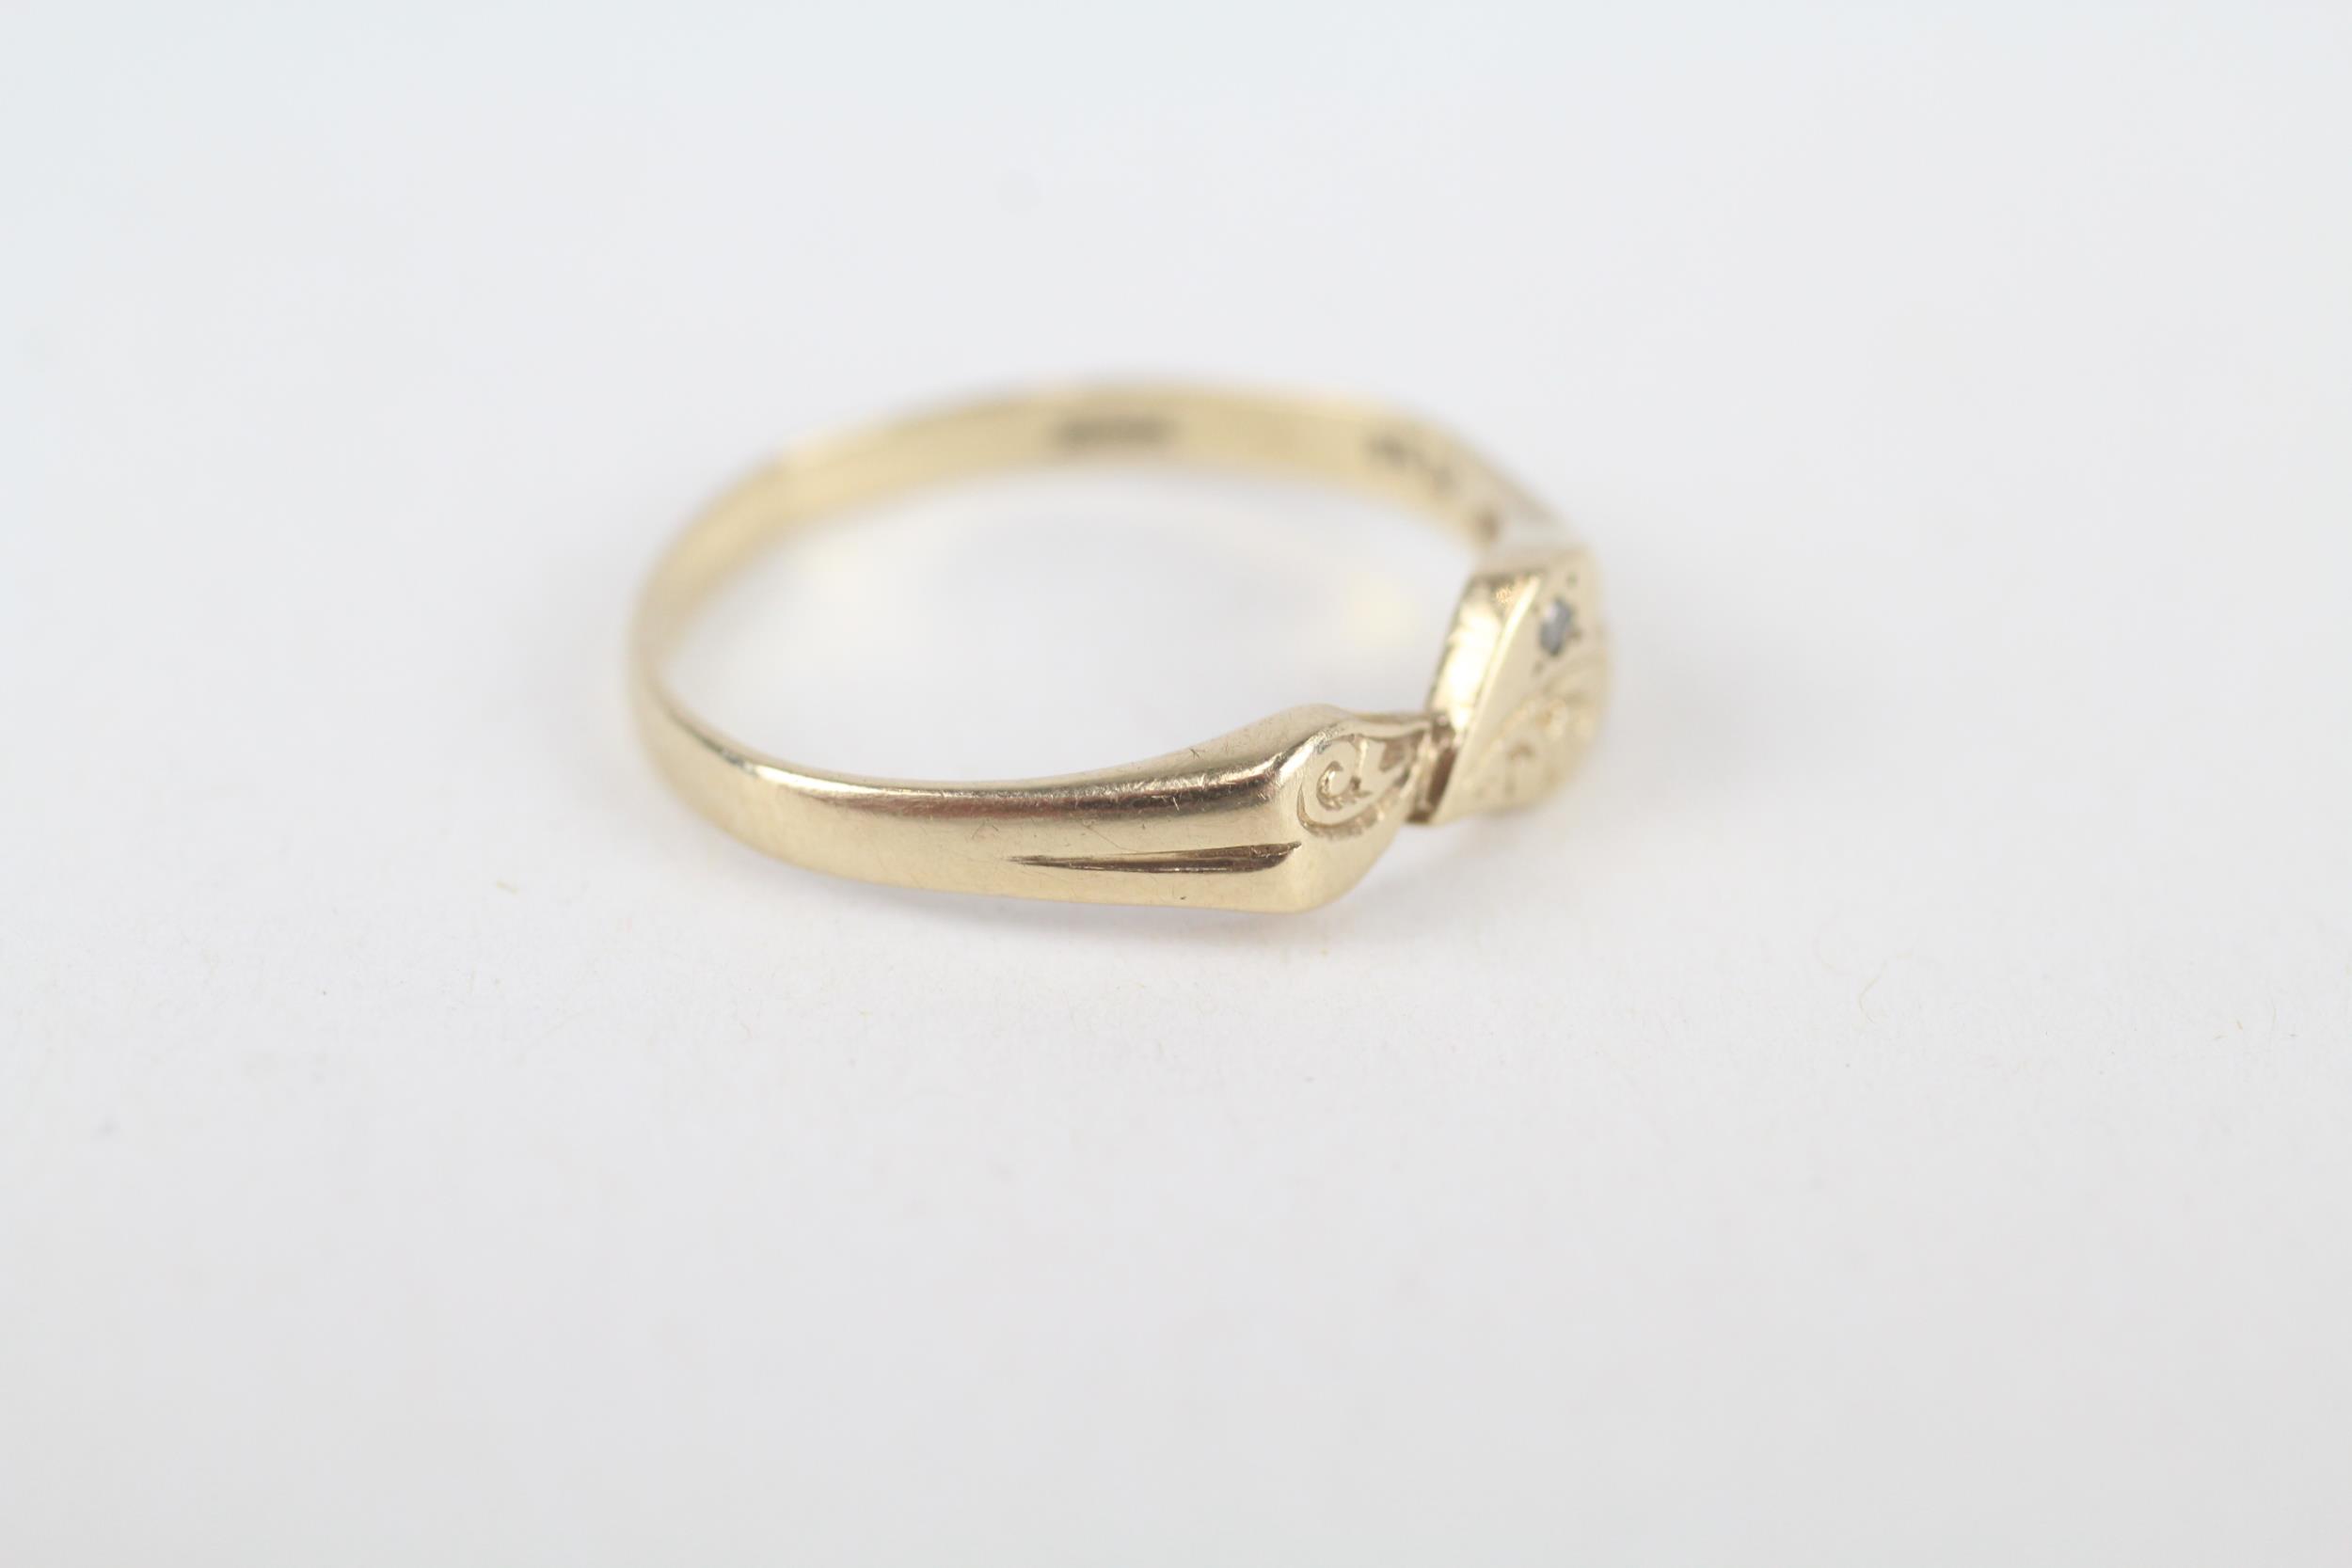 9ct gold diamond patterned ring Size N 1.3 g - Image 2 of 4